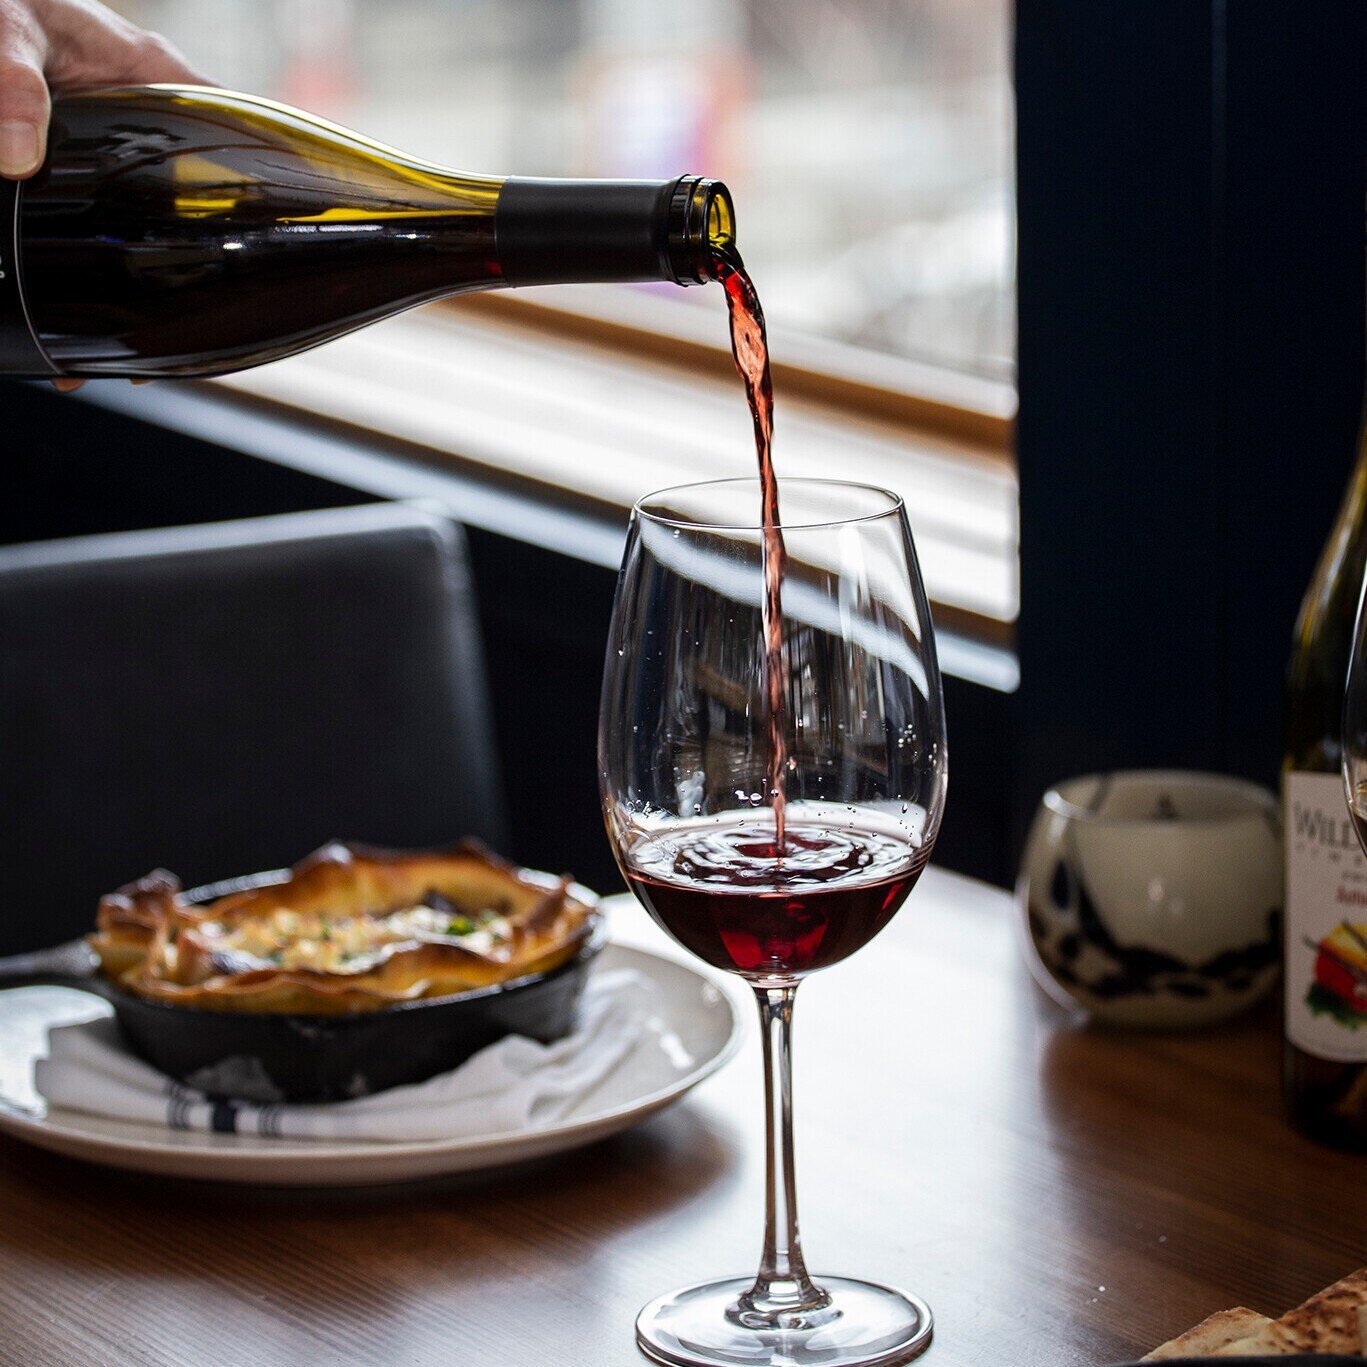 Let our staff guide you through our regional wine menu to find the perfect pairing. Curated to showcase wines from Canada and the Pacific Northwest, you won't find many of these wines anywhere else in Banff. 

#canadianwine #wine #regional #canadian 